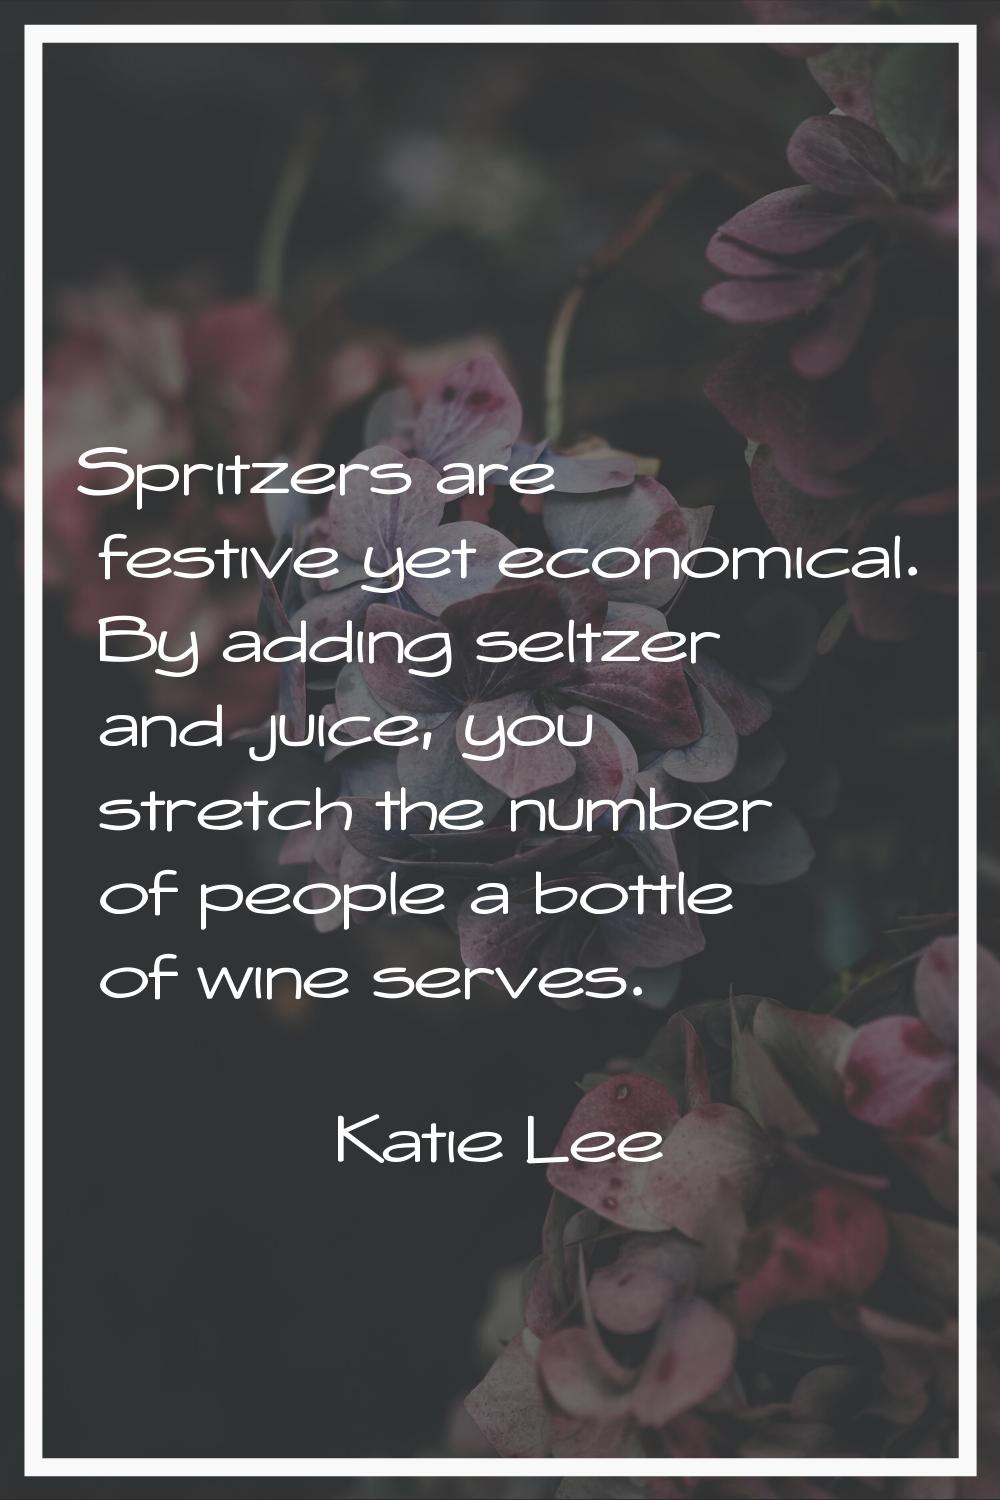 Spritzers are festive yet economical. By adding seltzer and juice, you stretch the number of people